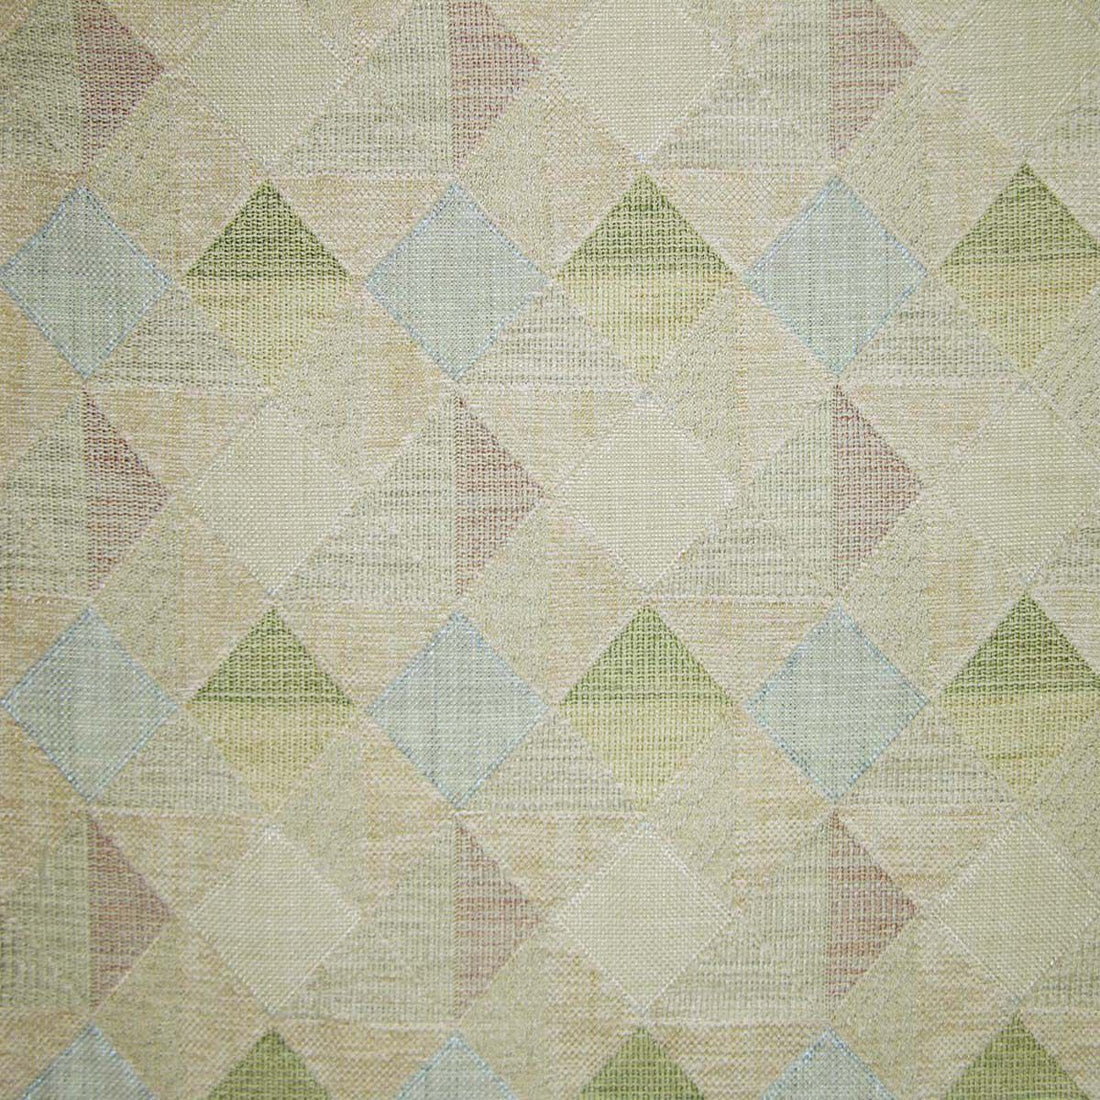 Calabash fabric in pastel color - pattern number LU 00010001 - by Scalamandre in the Old World Weavers collection